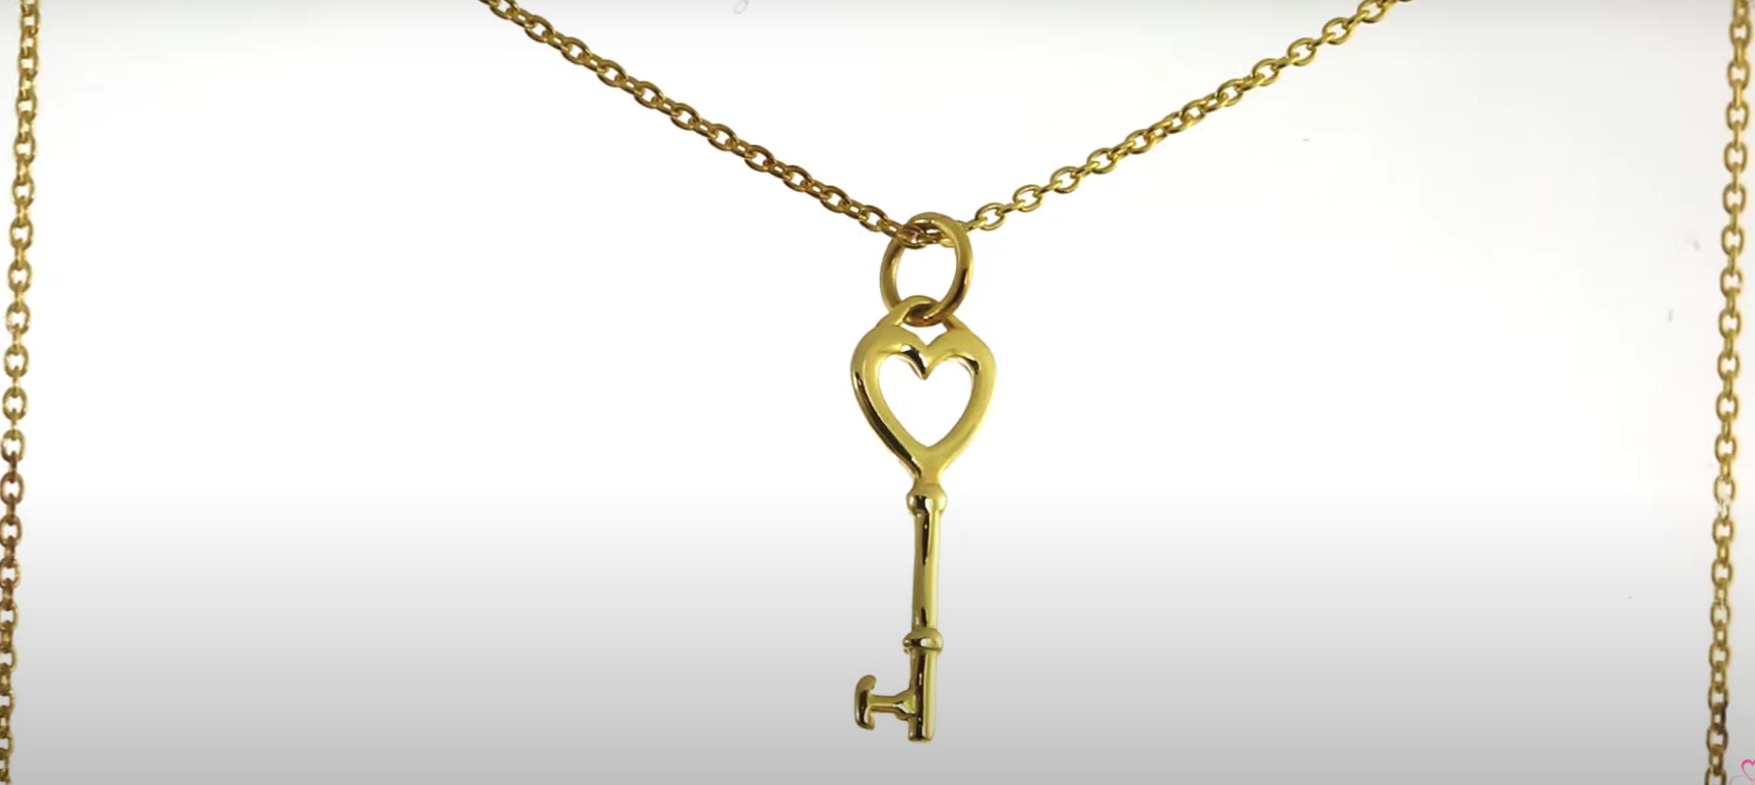 What do key necklaces mean